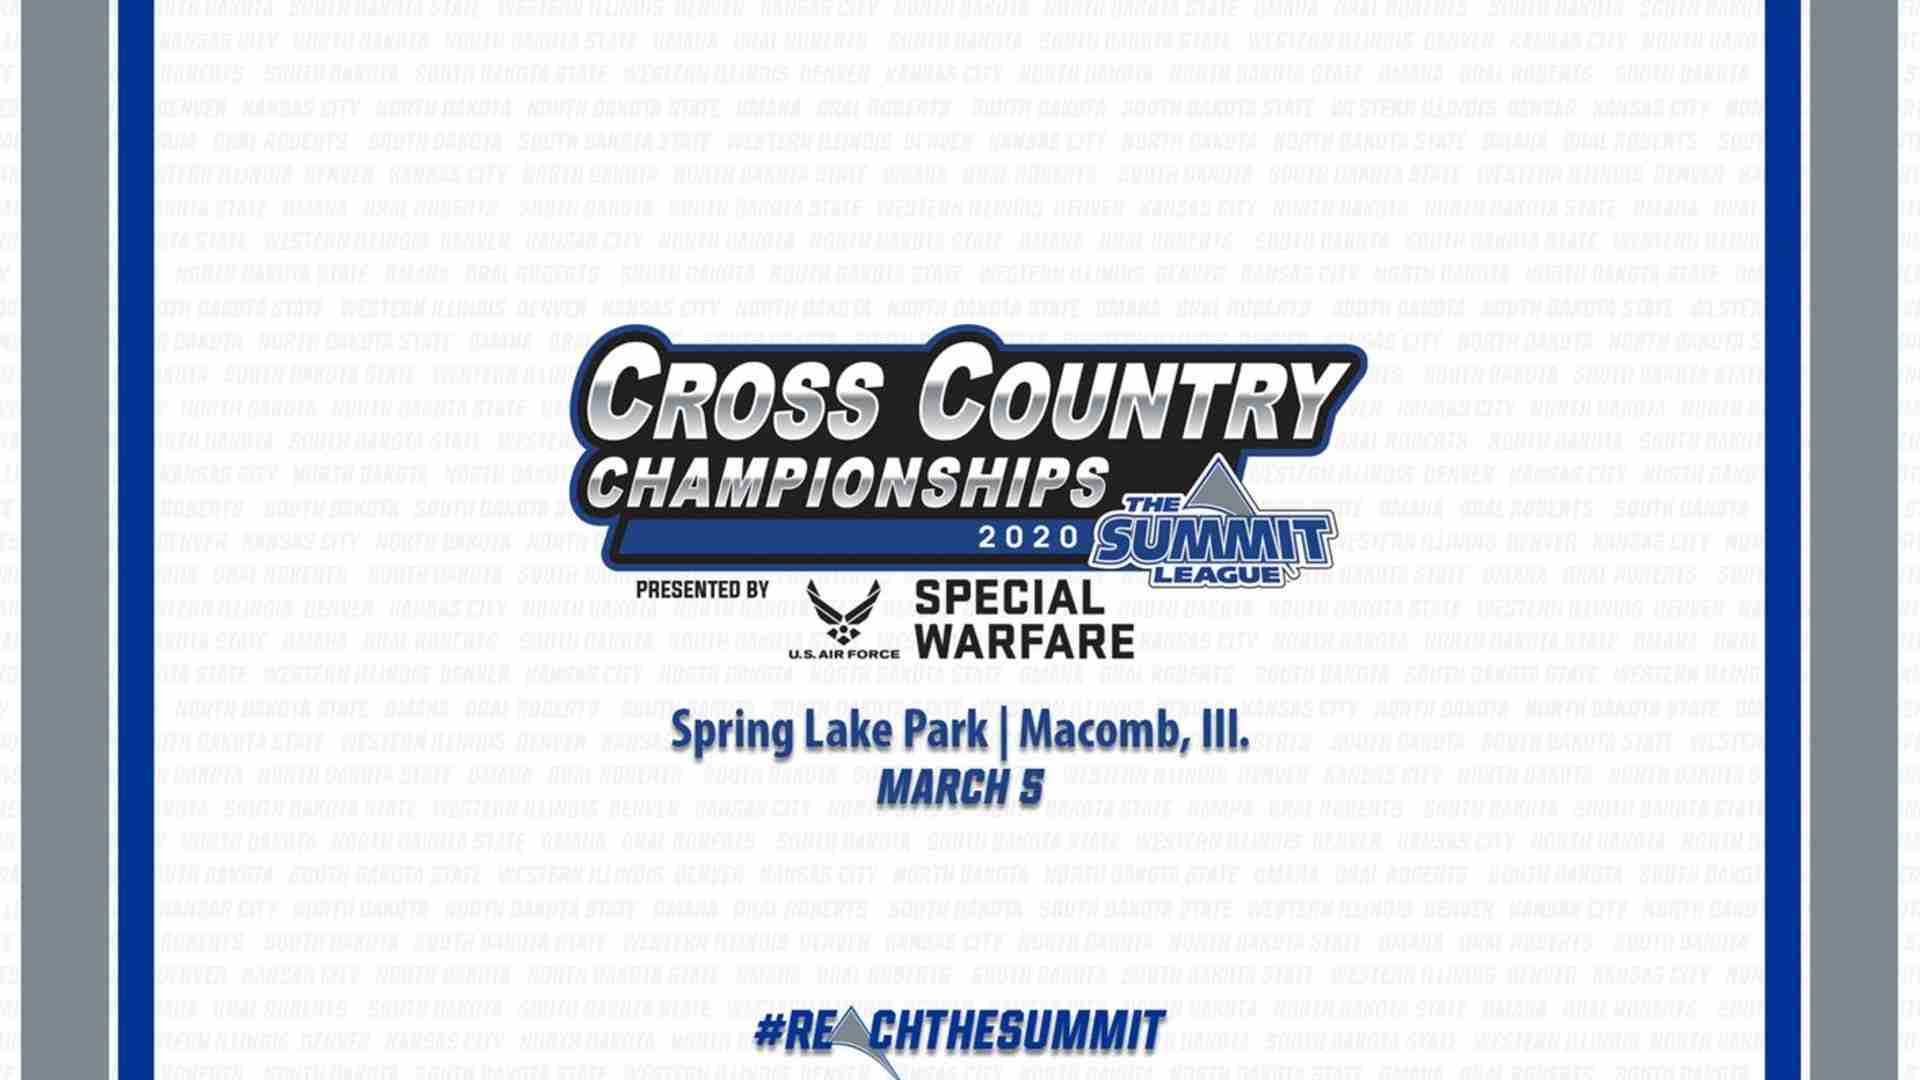 Watch live stream of The 2020 Summit League Cross Country Championships